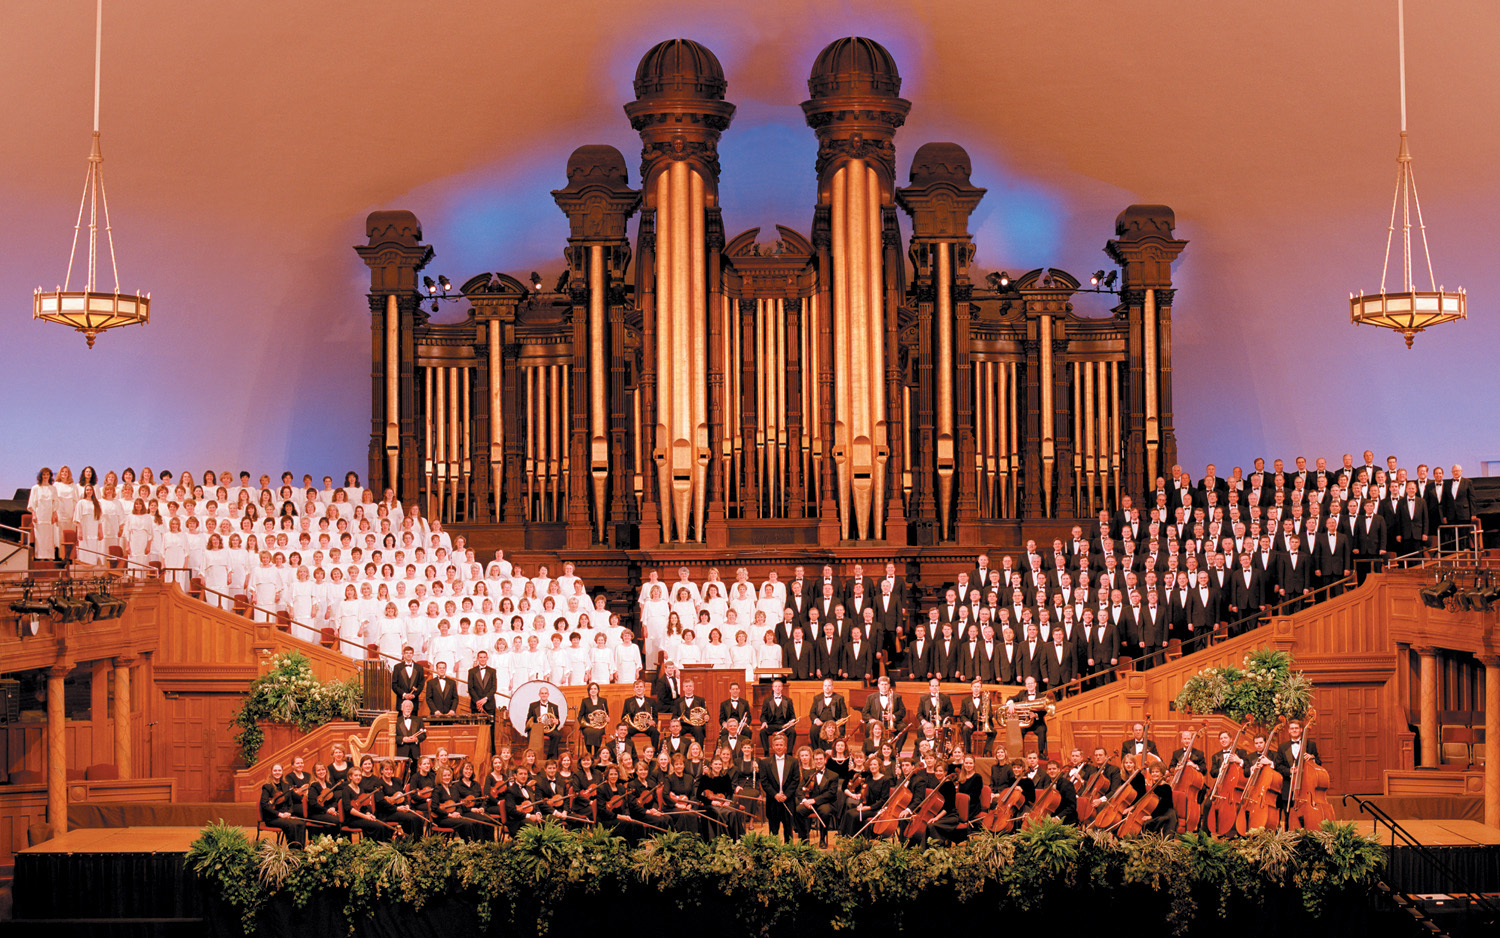 The Salt Lake Tabernacle of the Church of Jesus Christ of Latter-day Saints